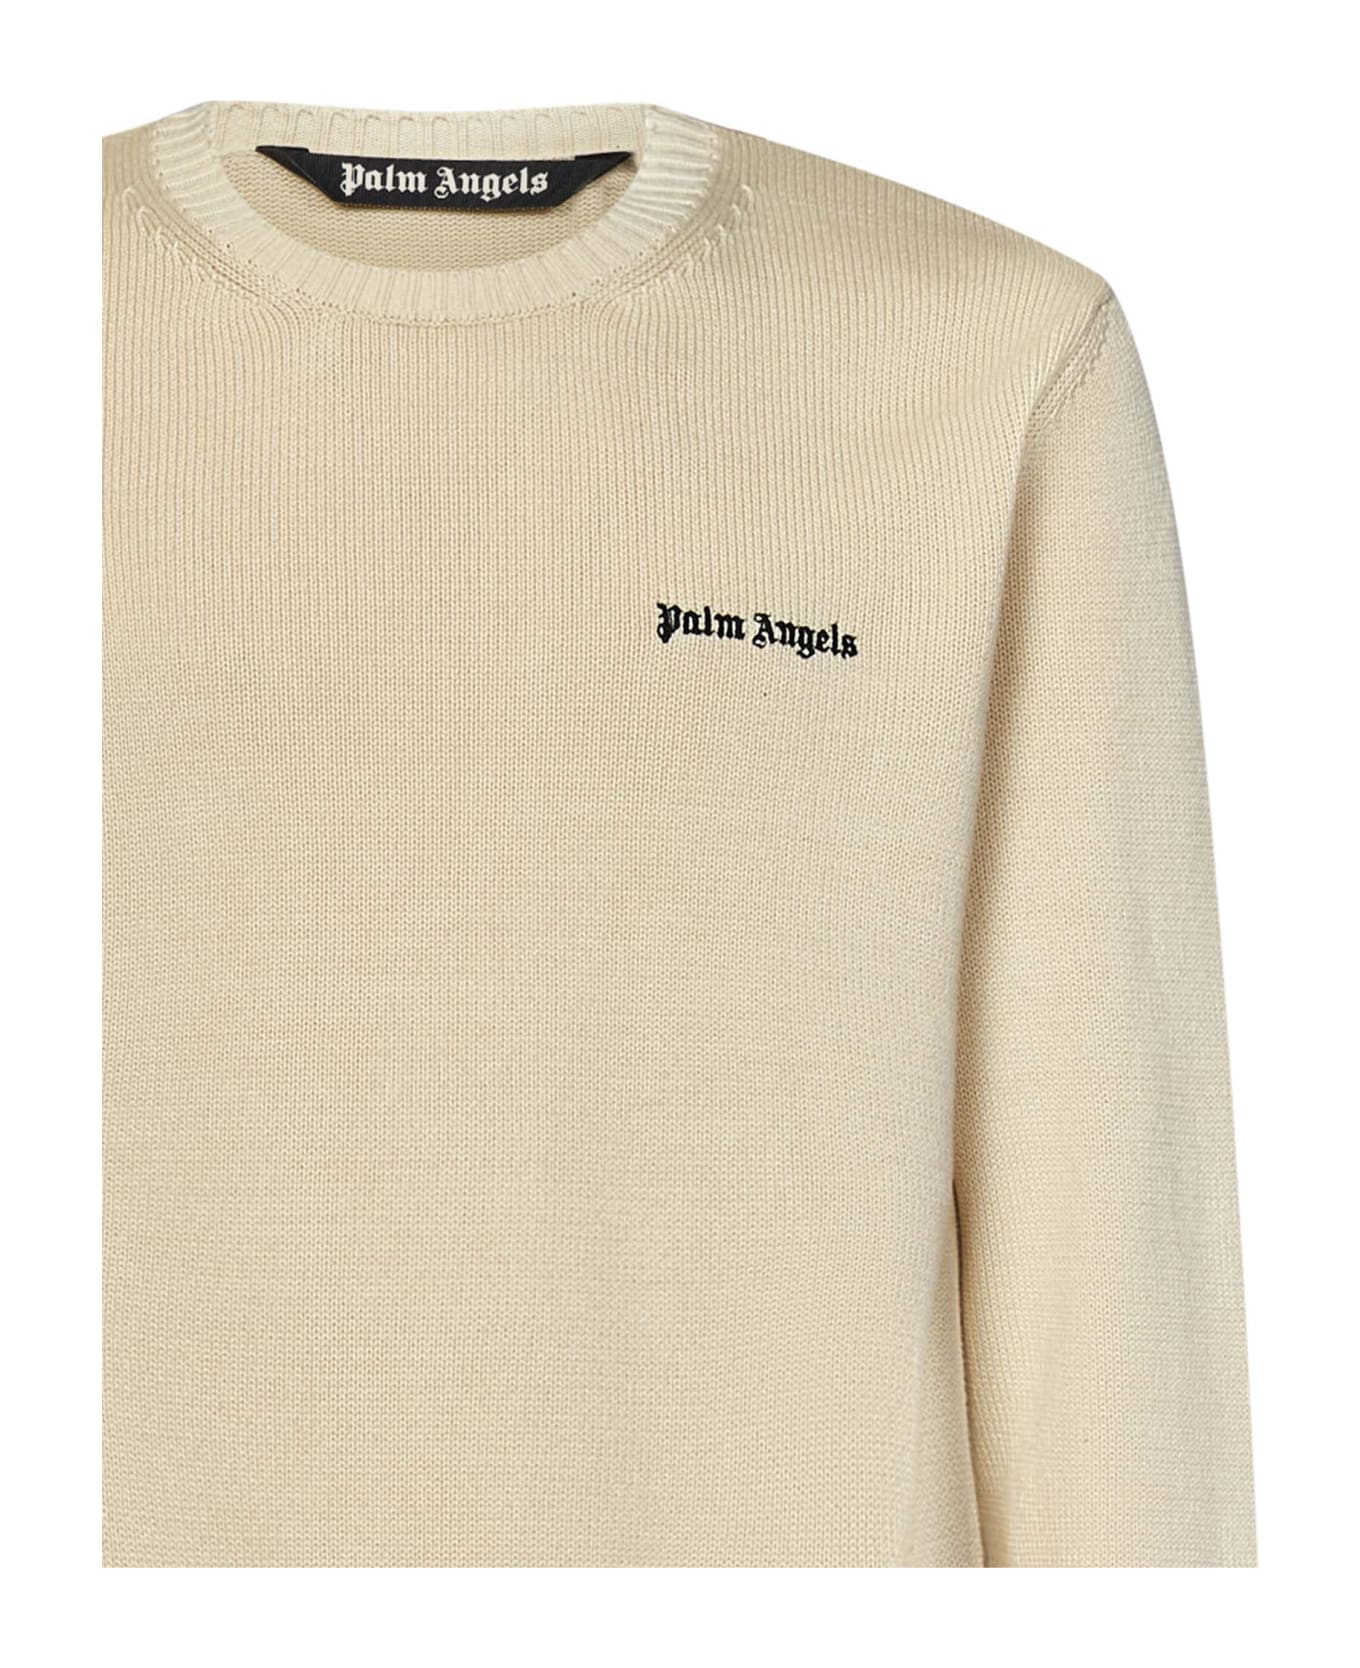 Palm Angels Classic Logo Sweater - Pink